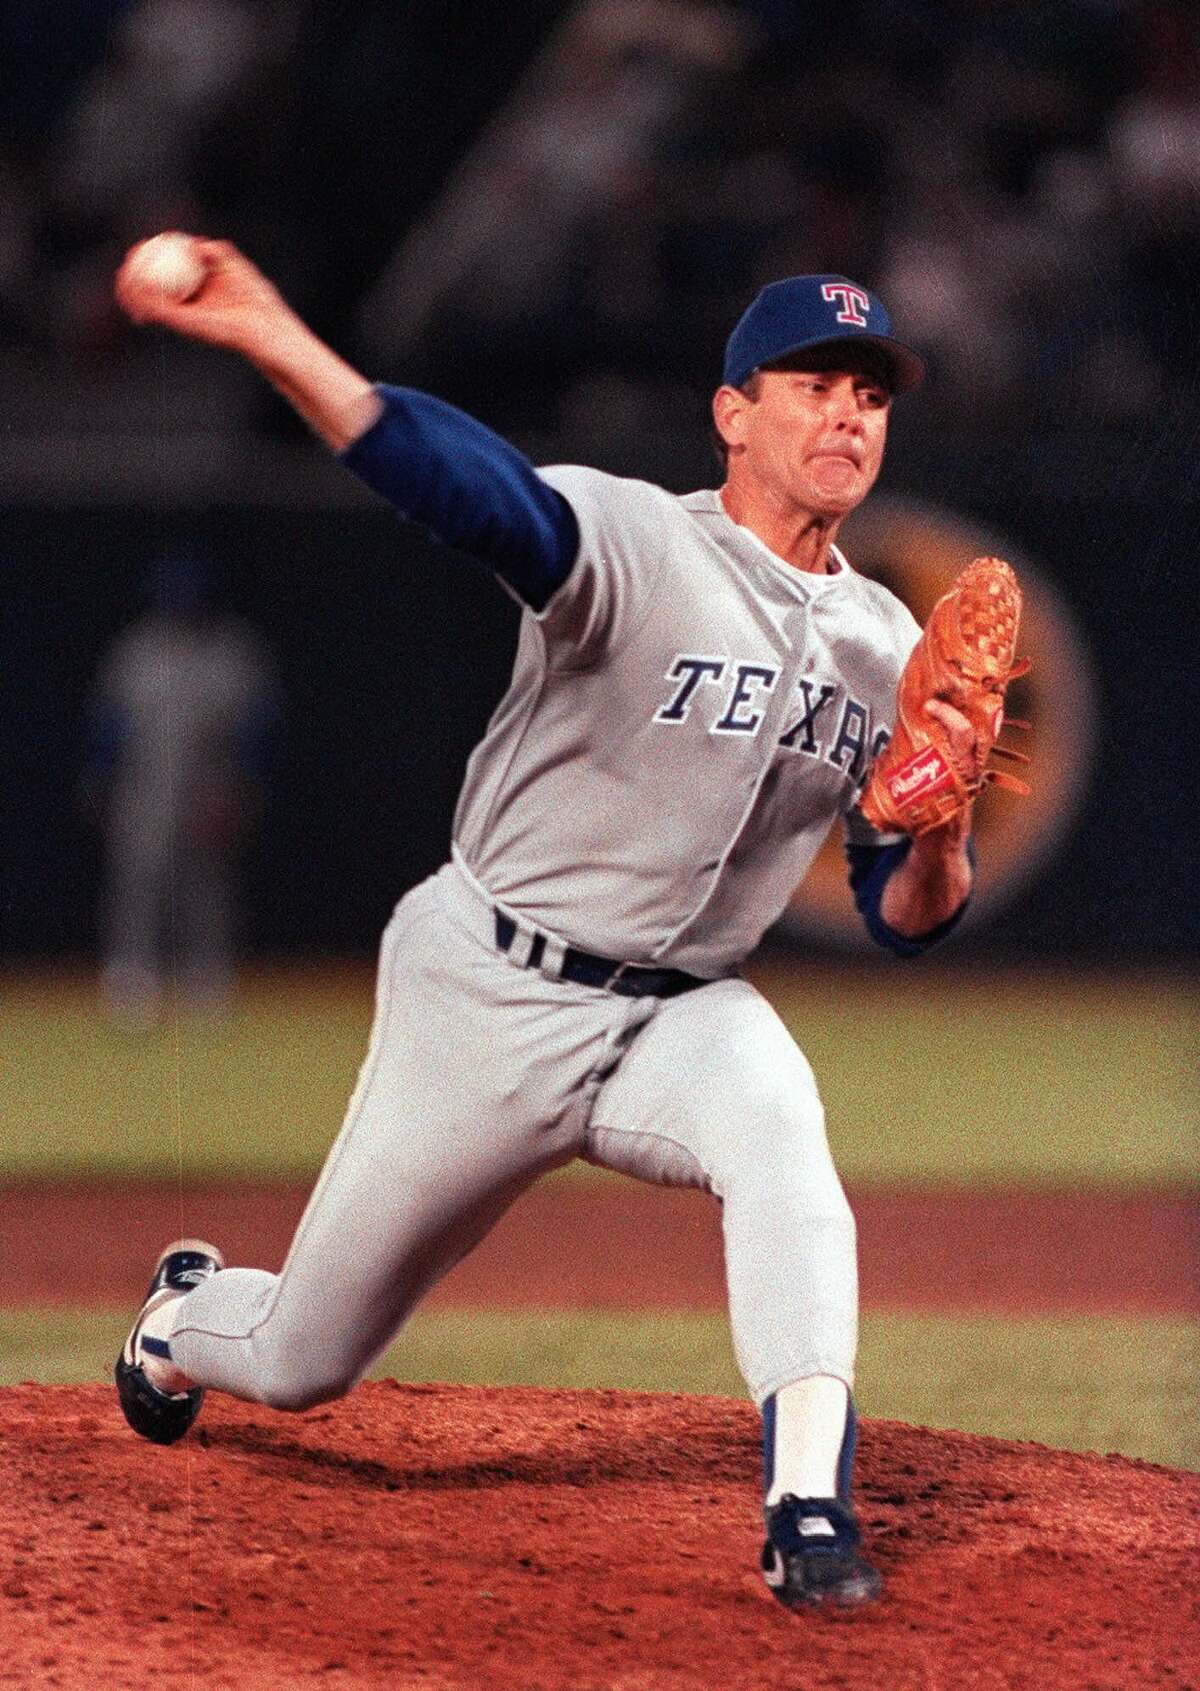 Nolan Ryan, Rangers After Astros owner John McMullen low-balled the legend in negotiations, he signed with the Rangers, for whom he pitched his final five seasons. Even worse for Astros fans, he chose to have the Rangers' cap on his Hall of Fame plaque.